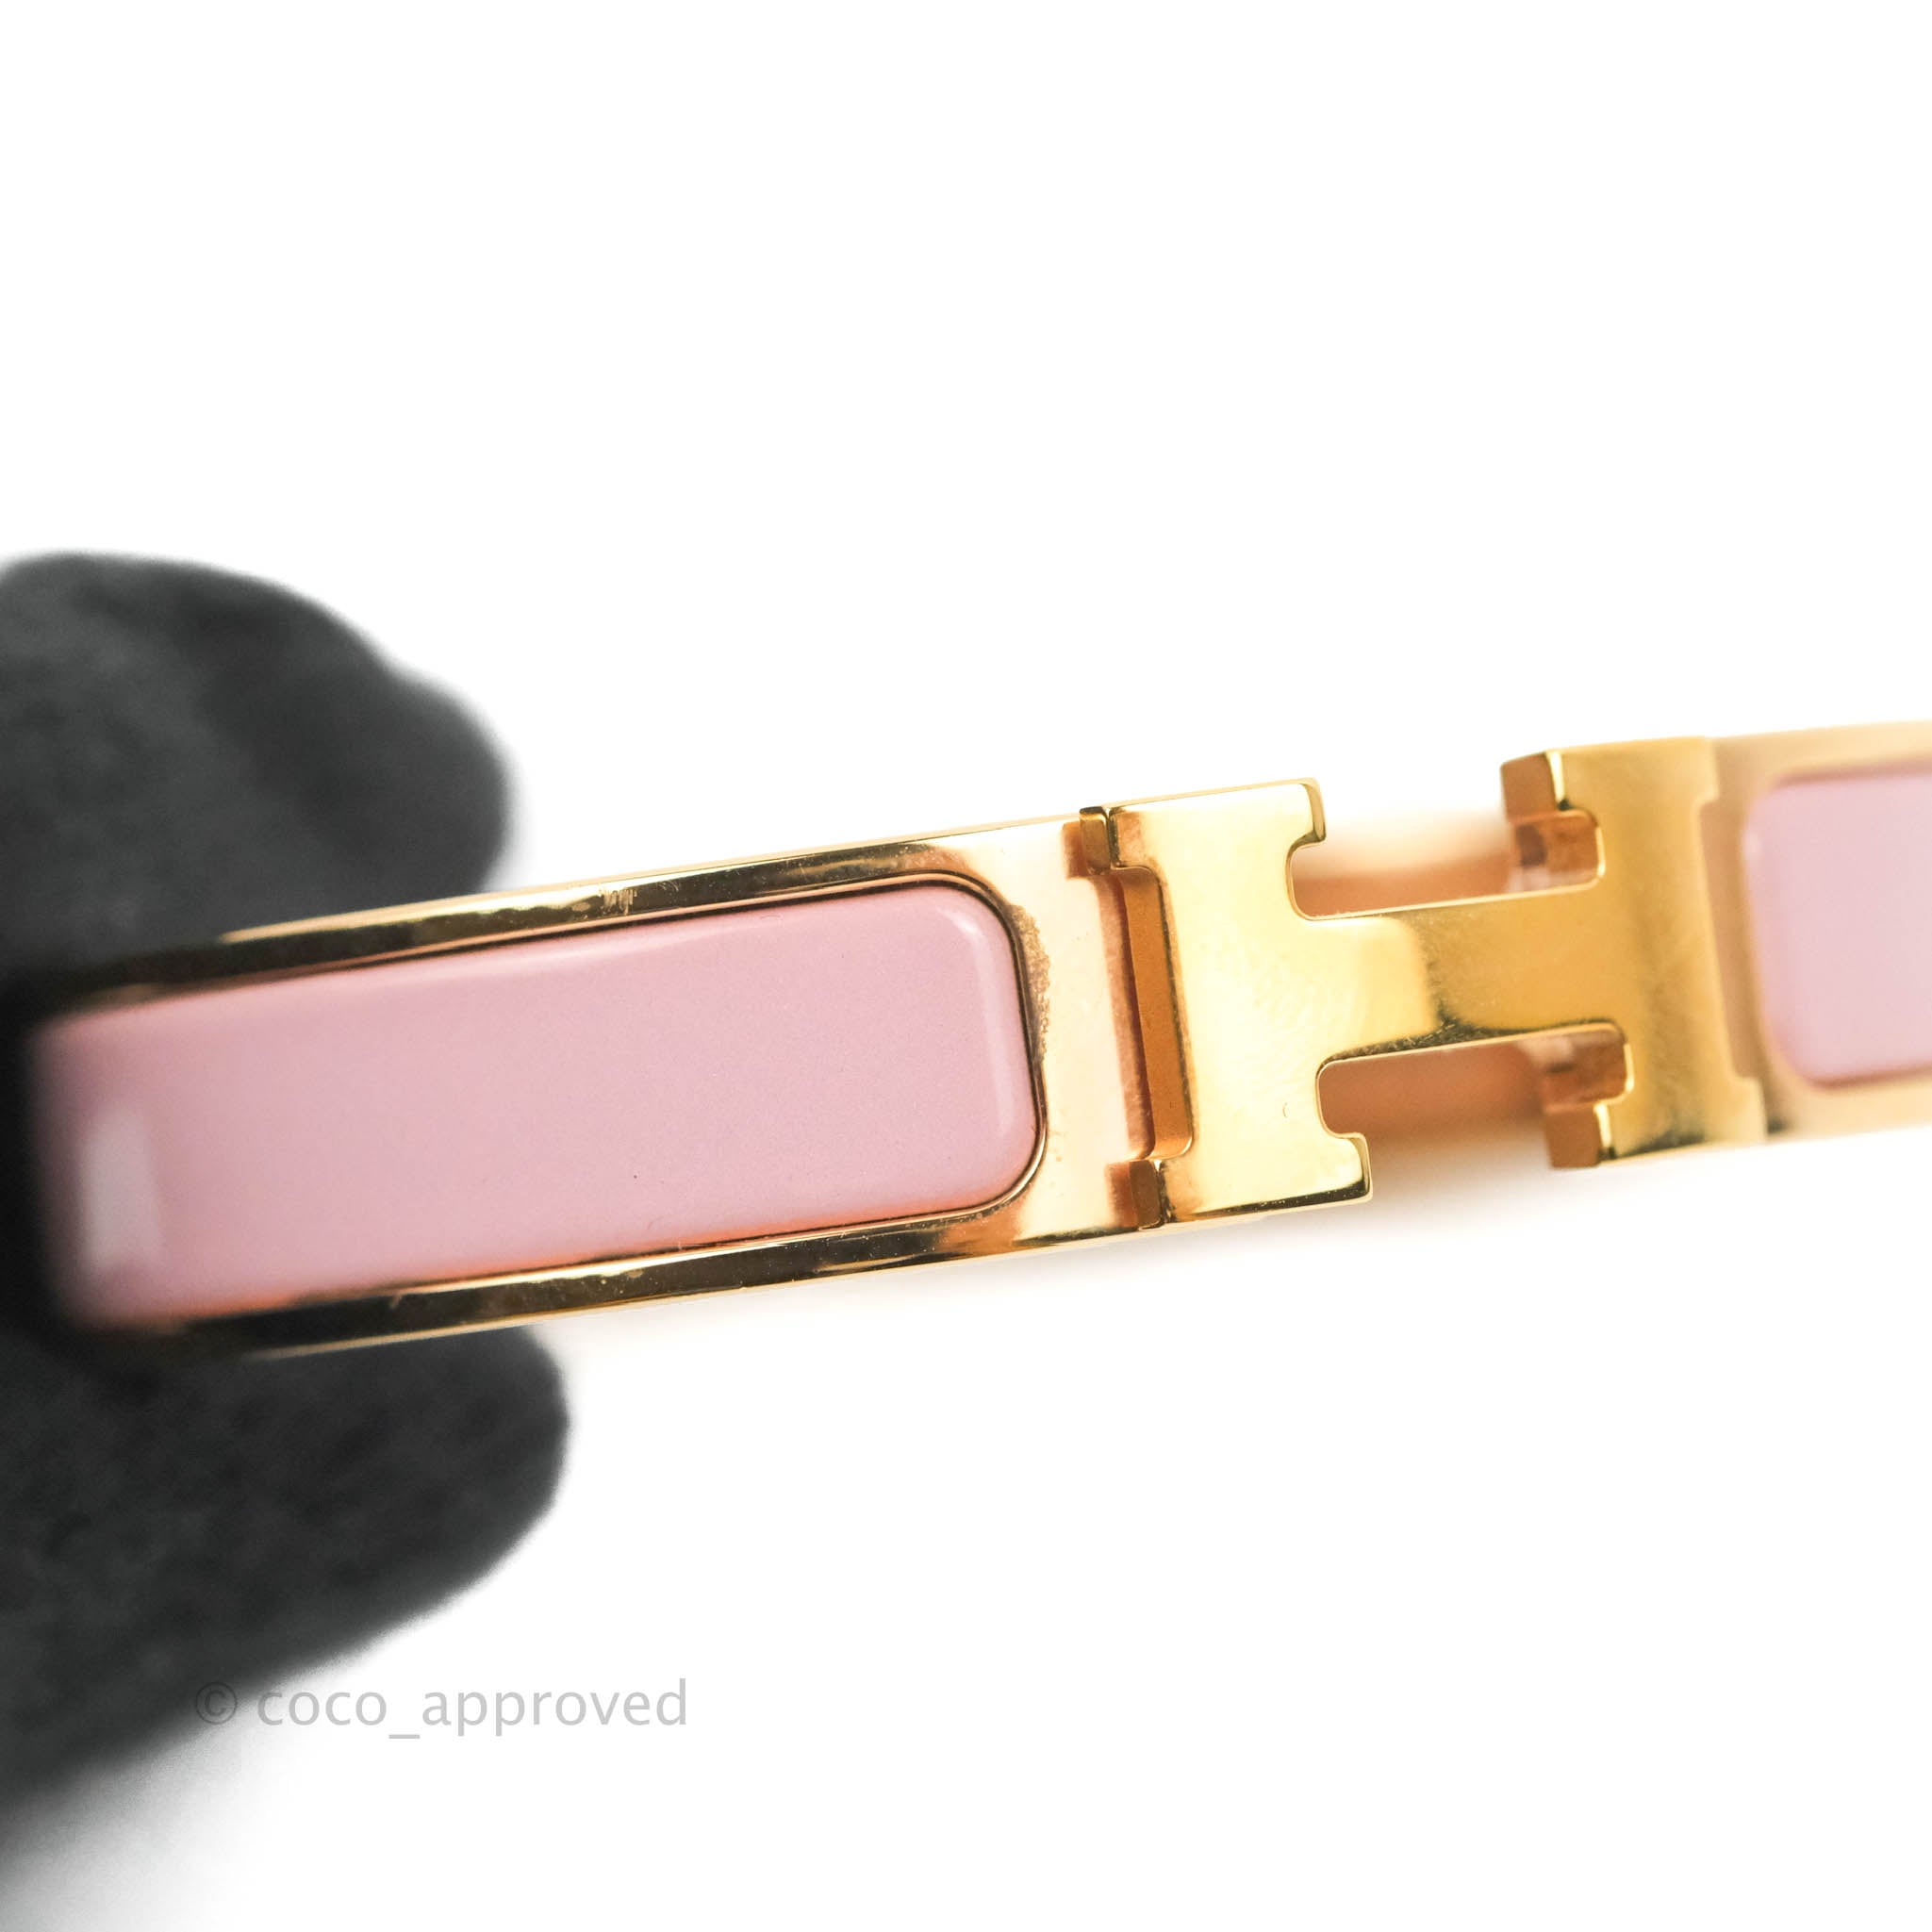 Hermes Narrow Clic H Bracelet (Rose Dragee/Yellow Gold Plated) - PM